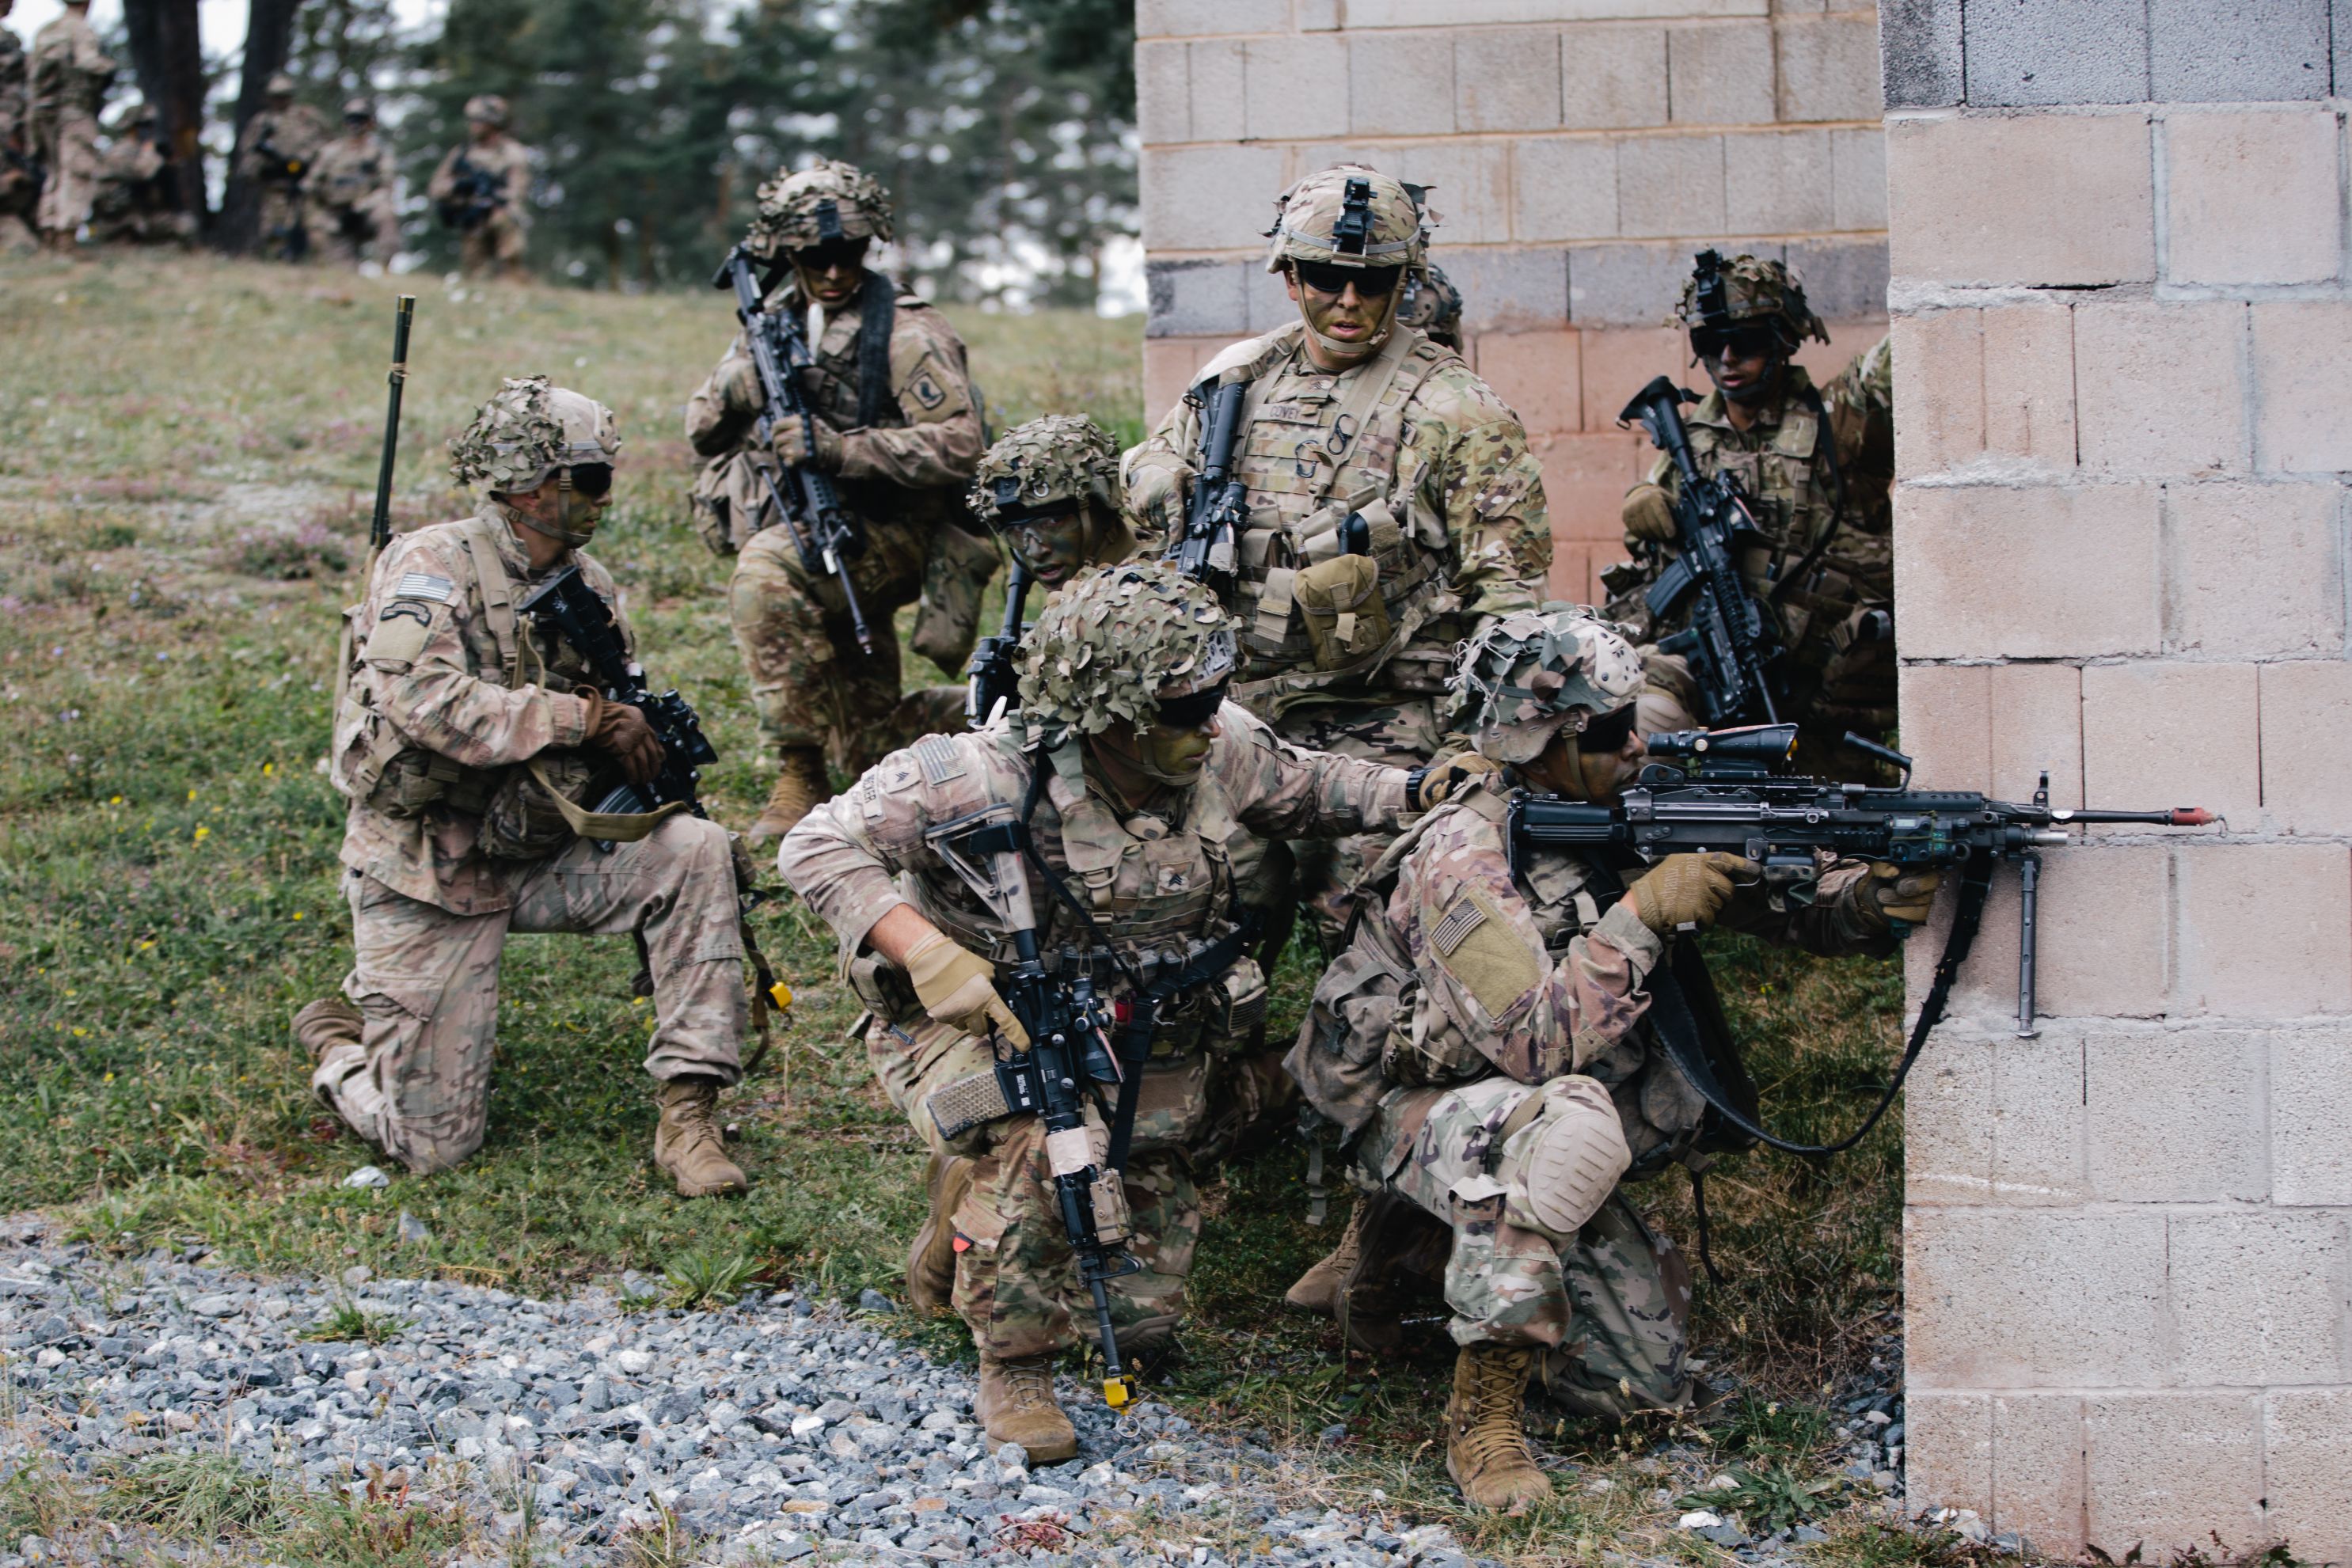 U.S. Army paratroopers assigned to 2nd Battalion, 503rd Infantry Regiment clear a town during urban operations training in Grafenwoehr Training Area during Saber Junction 2019.